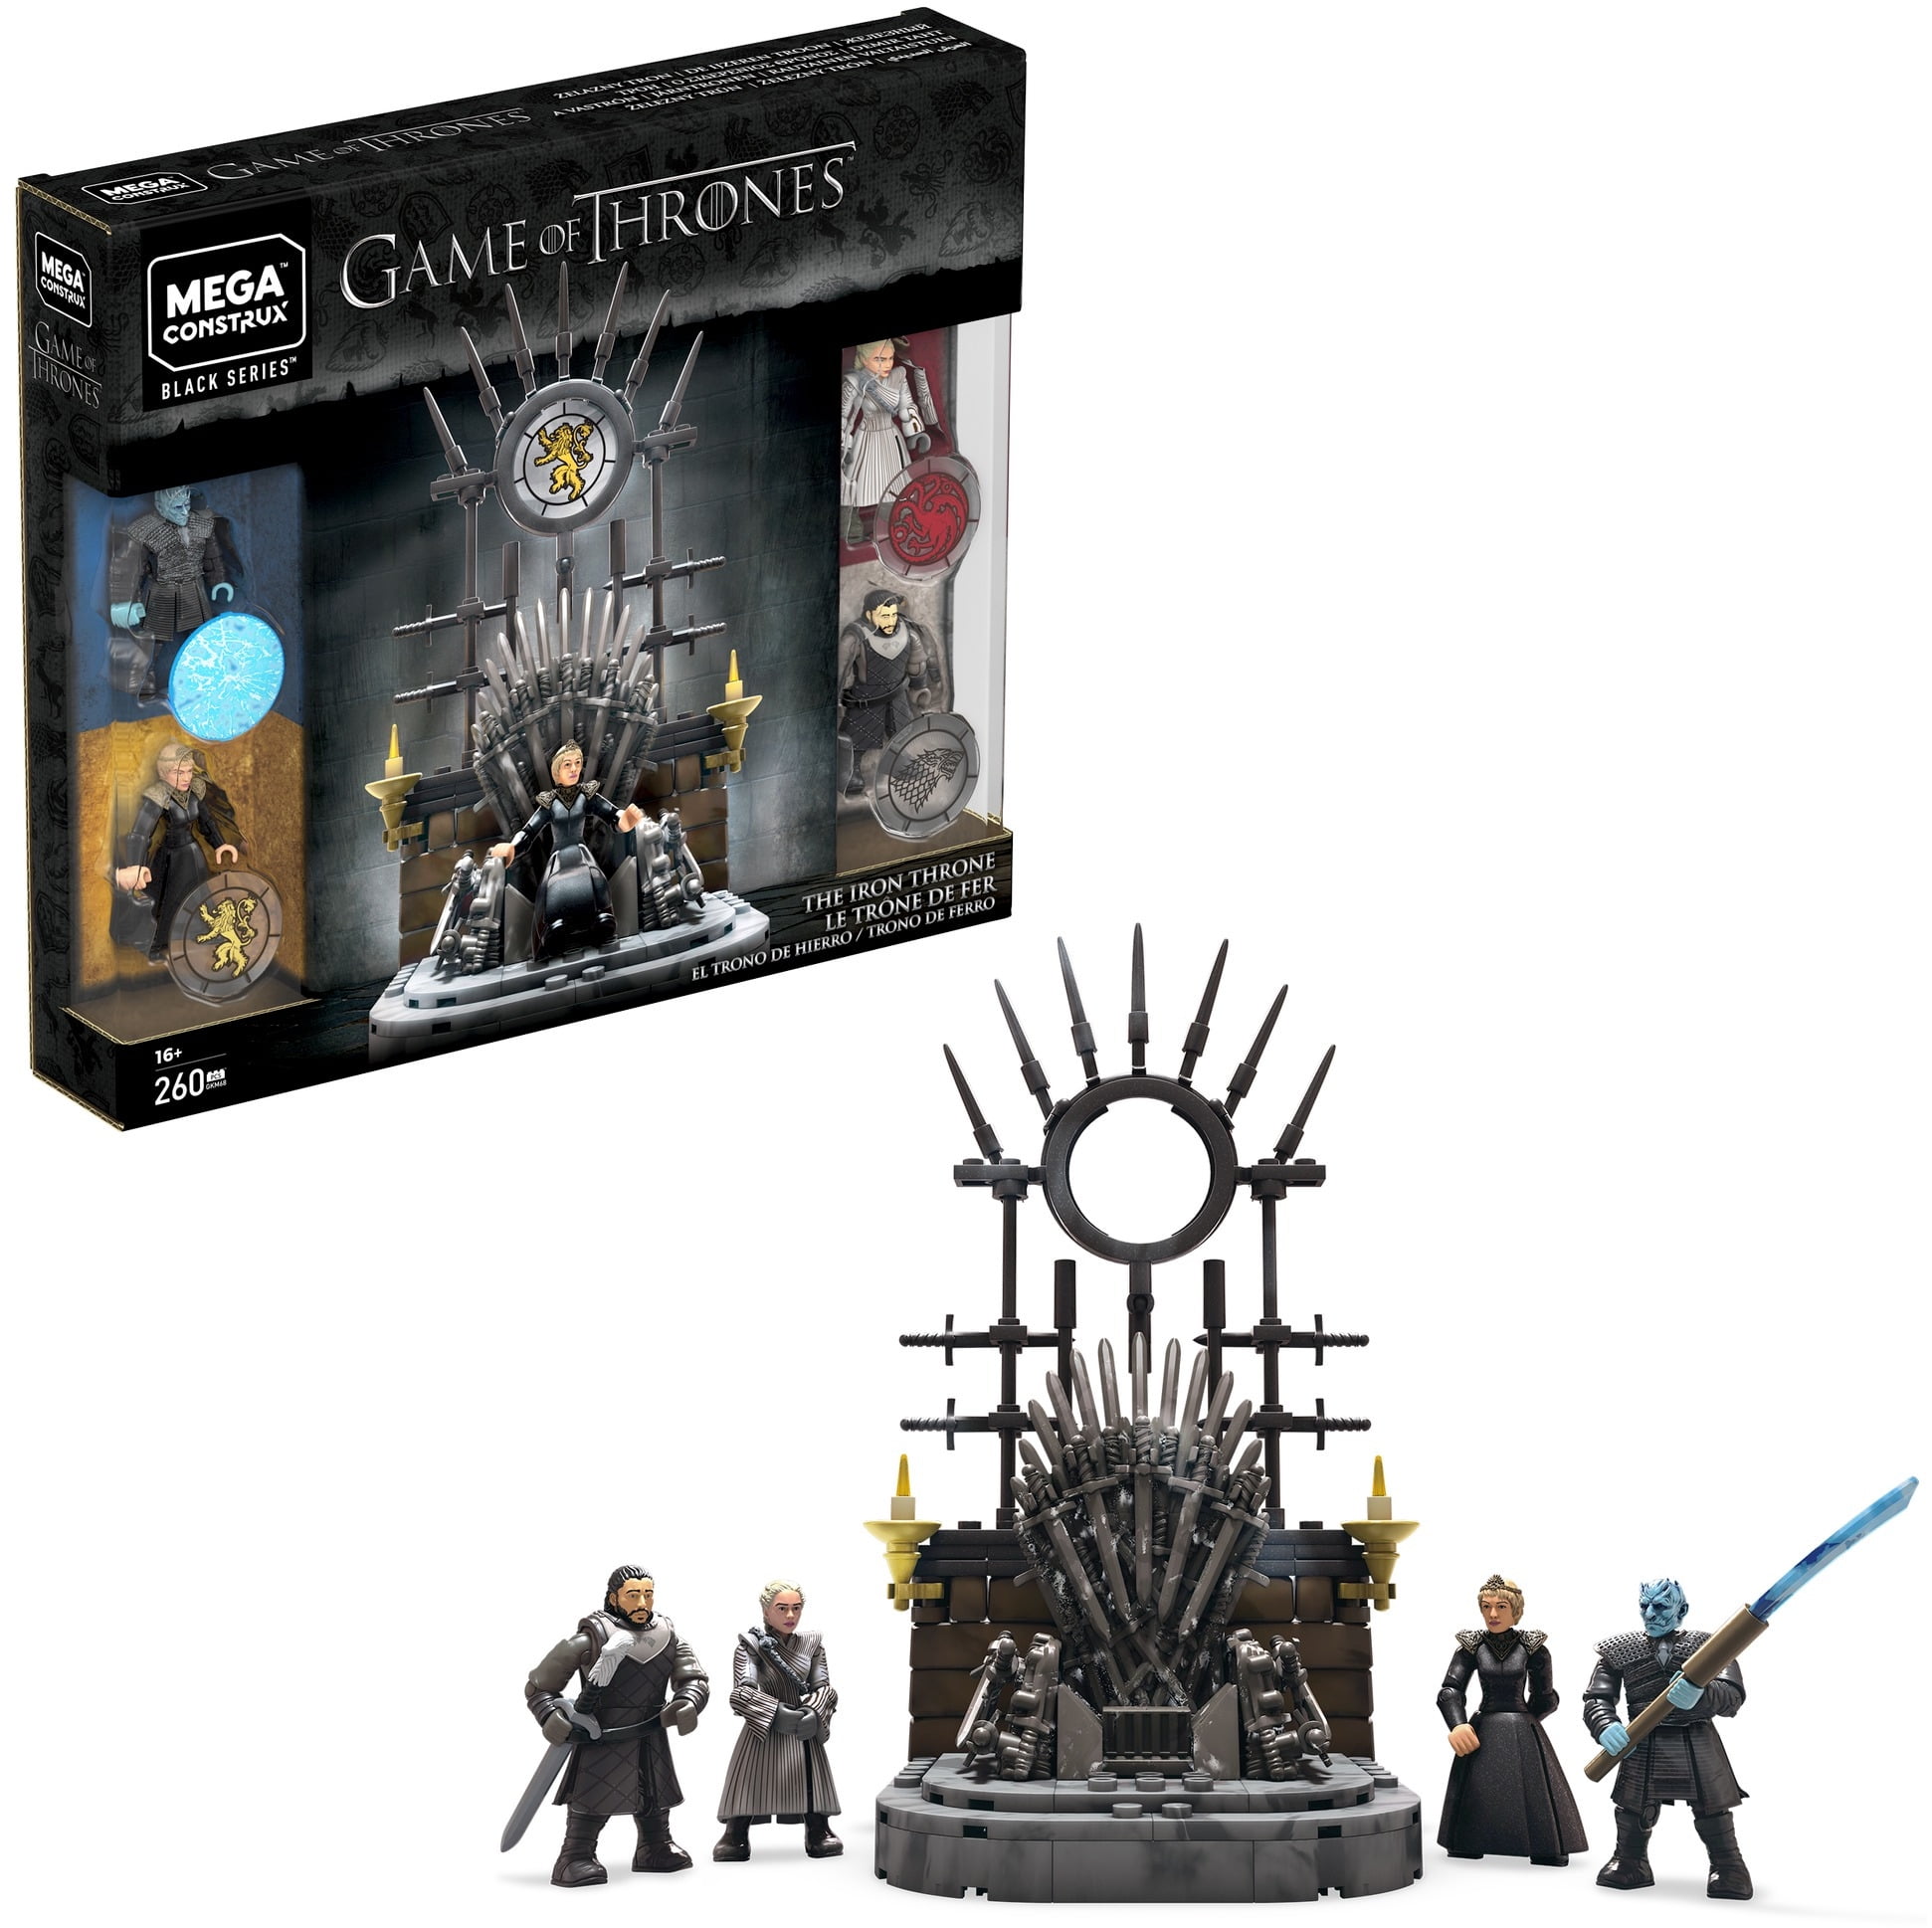 Game of Thrones The Iron Throne MEGA Construx Black Series 258 Pcs 4 Figures for sale online 